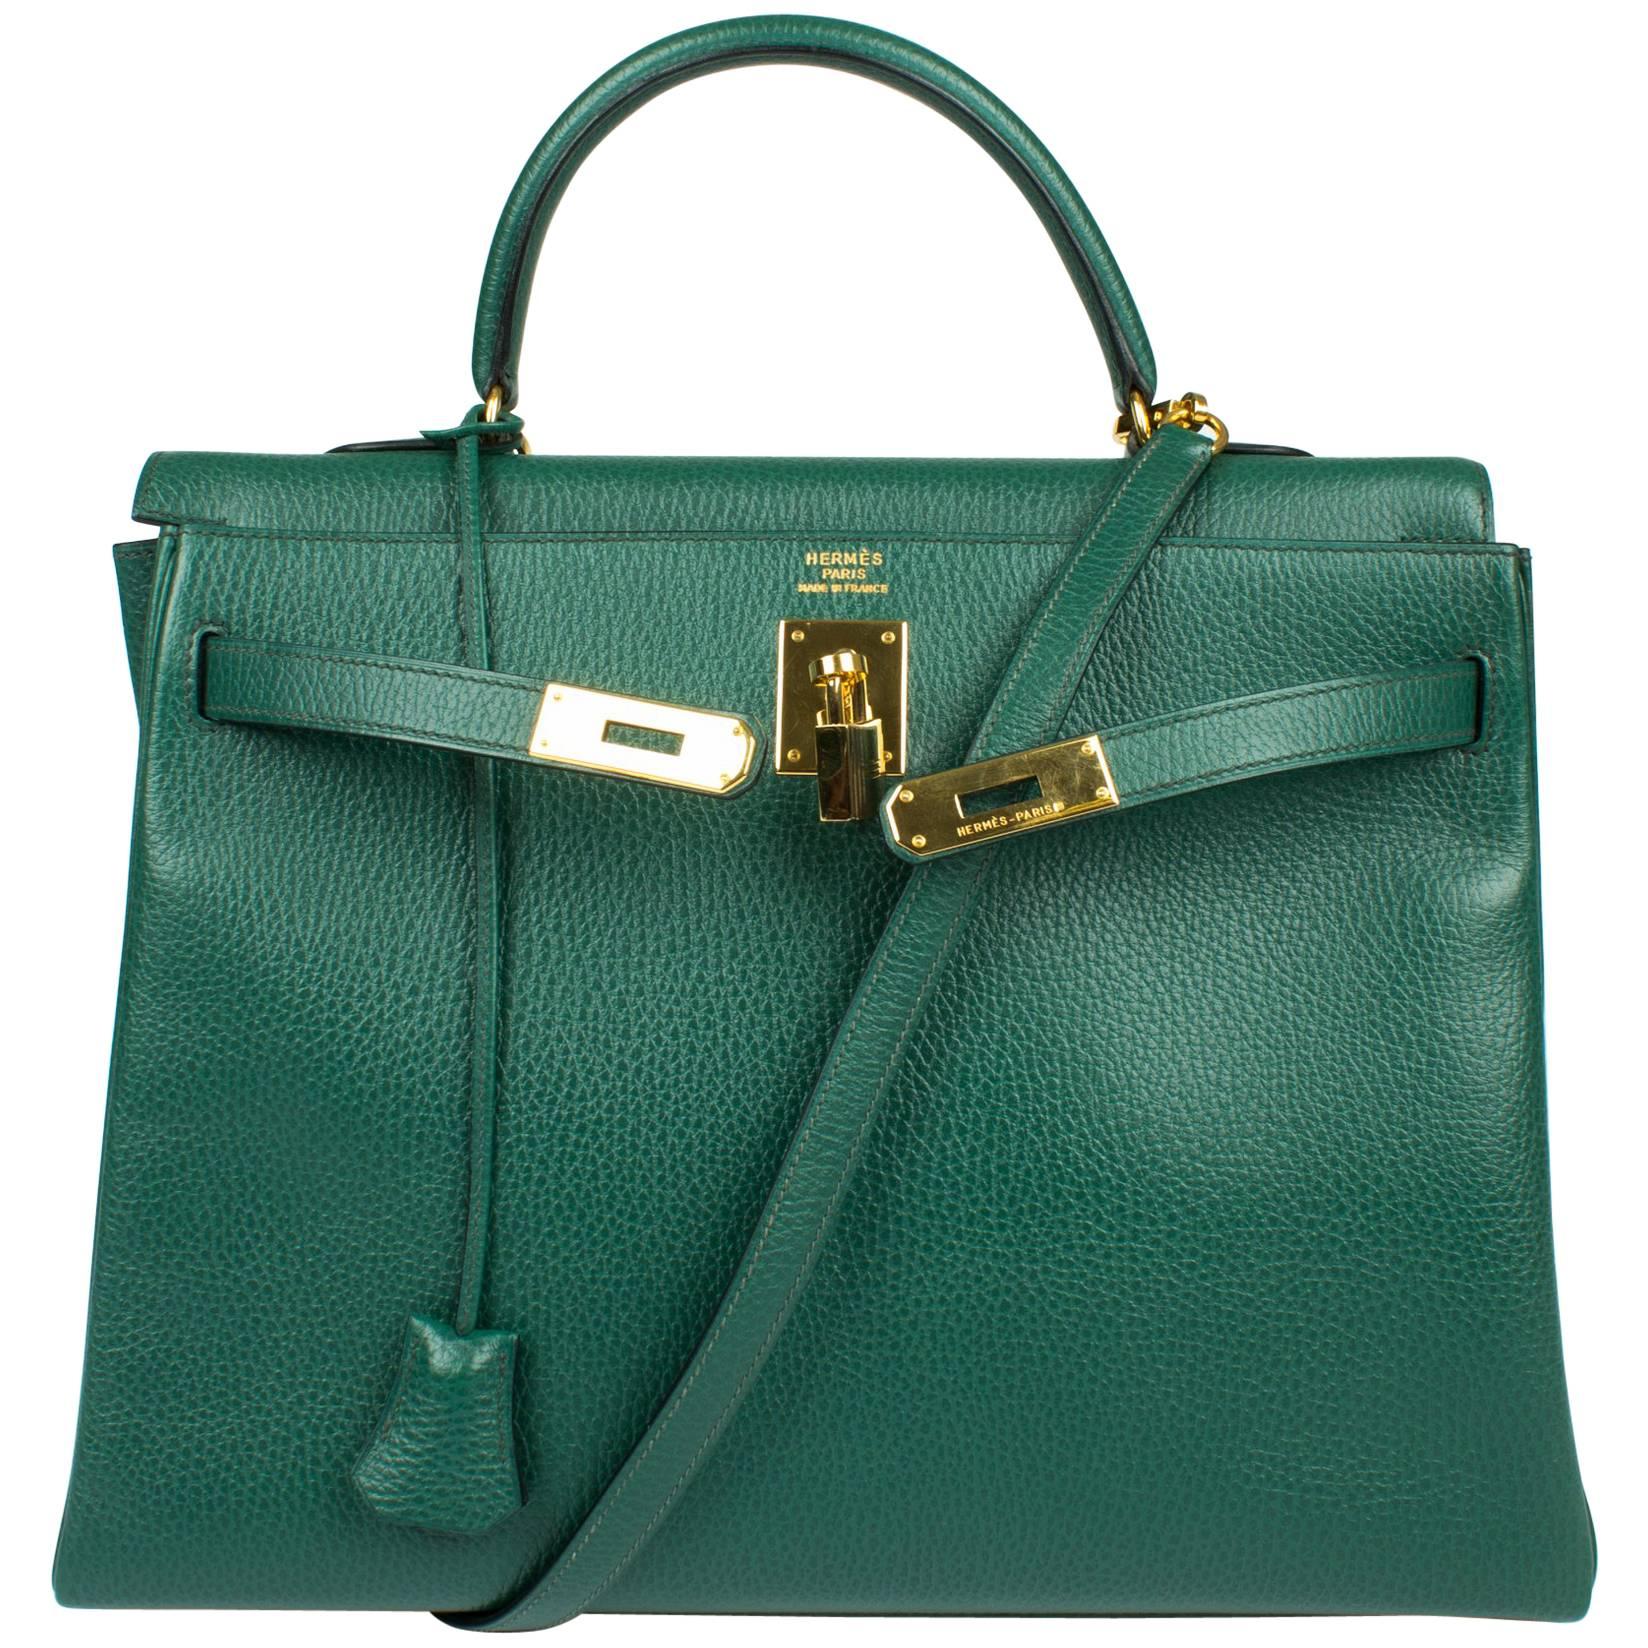 Hermès Kelly Bag 35 Clemence Leather - Emerald Green 